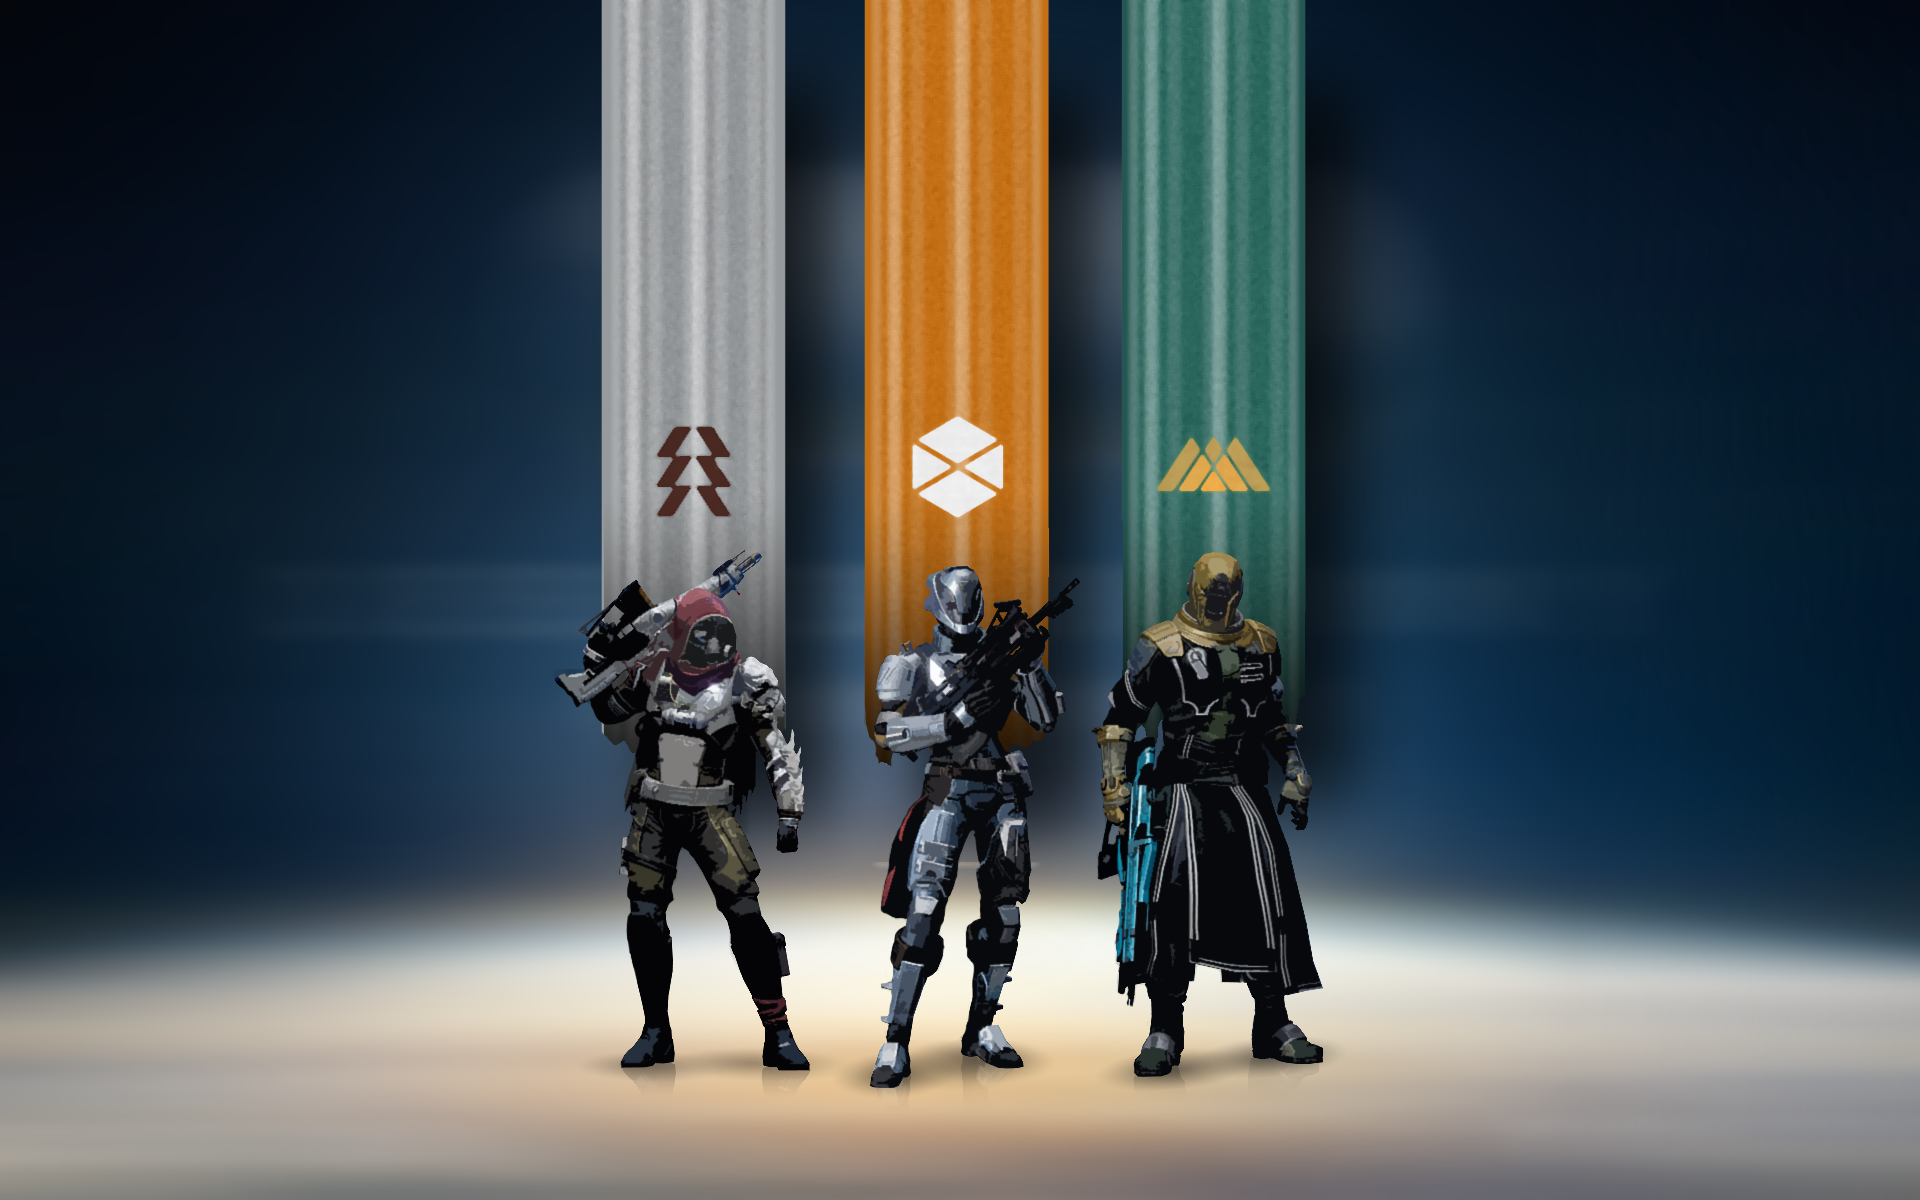 Did I ever tell you that im a huge Destiny and Bungie fan